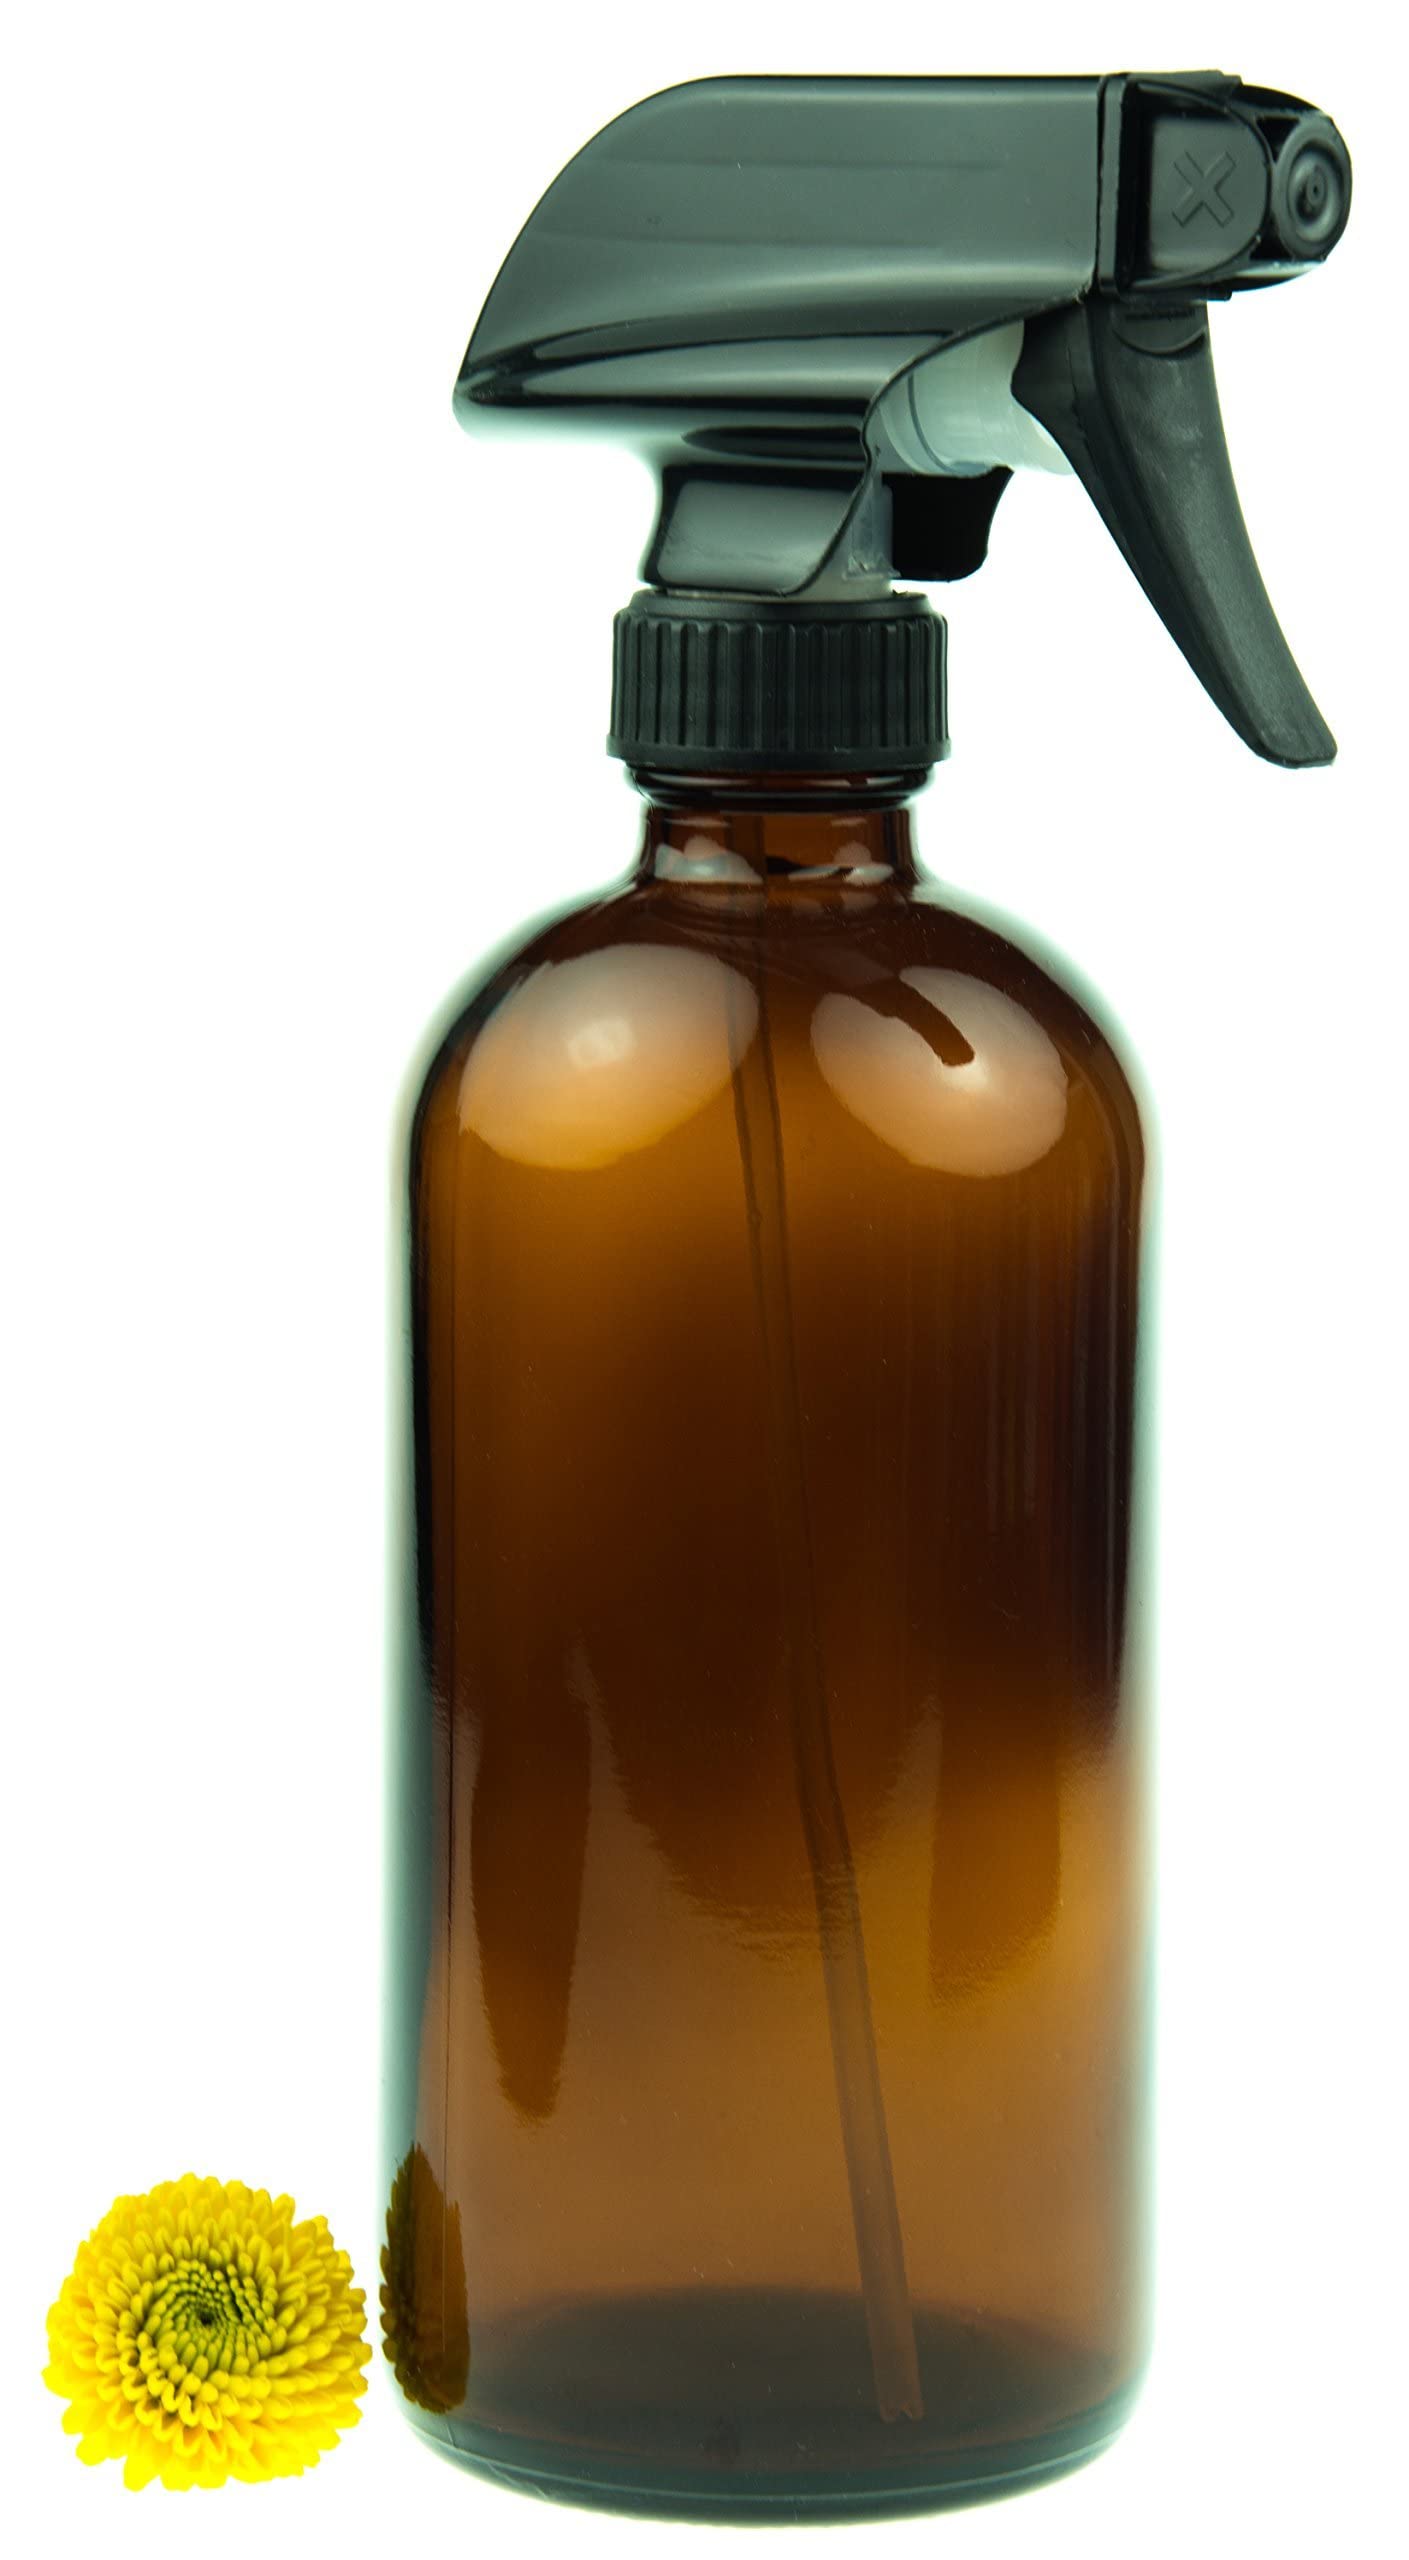 Empty Amber Glass Spray Bottle - Large 16 oz Refillable Container is Great for Essential Oils, Homemade Cleaning Products, Aromatherapy - Durable Black Trigger Sprayer w/ Mist and Stream Setting